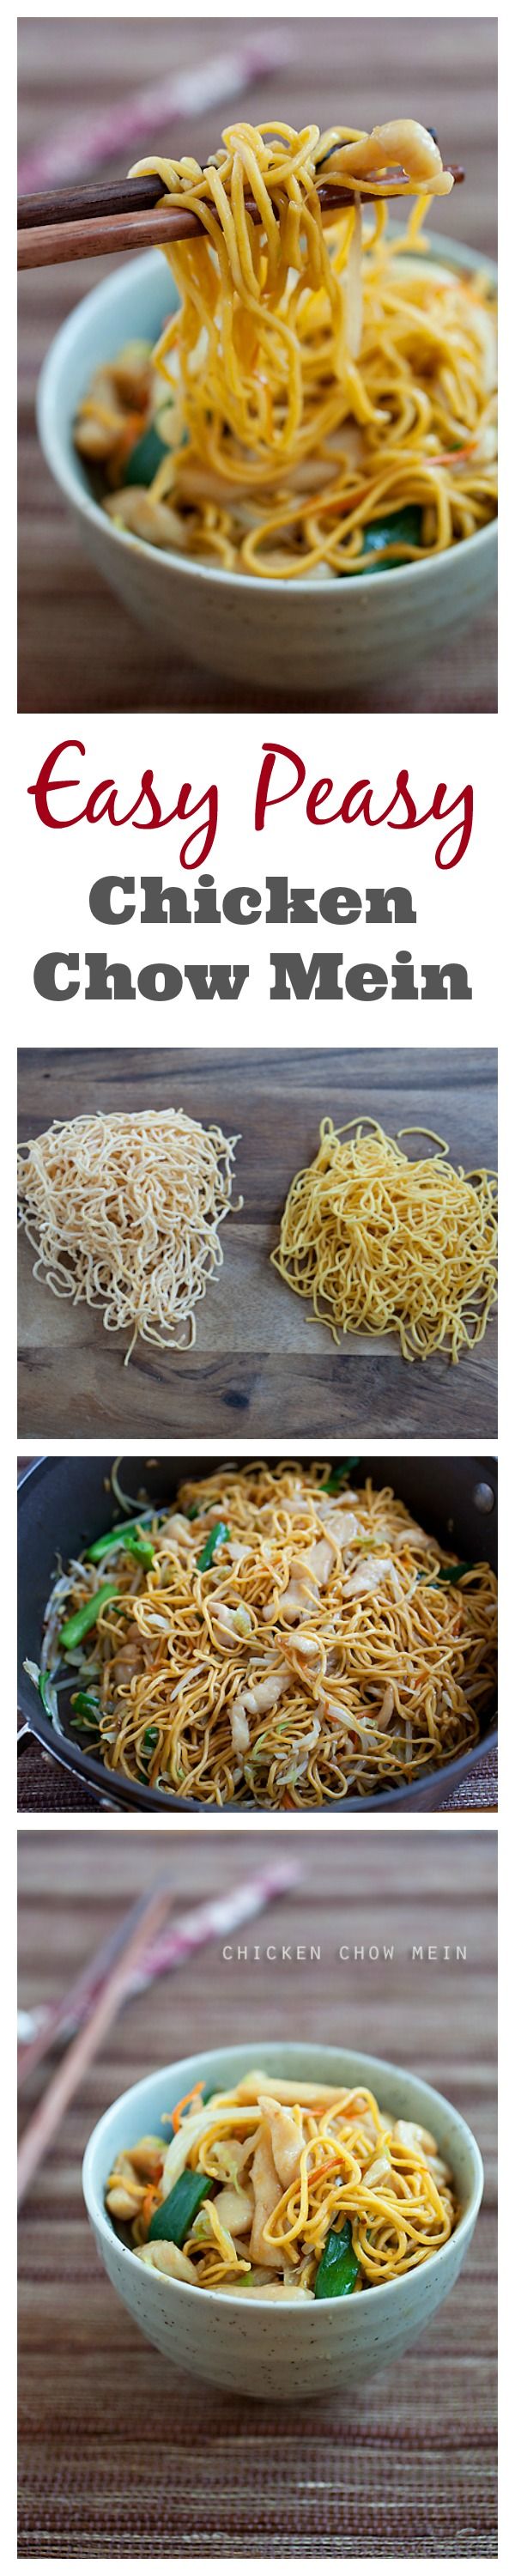 Easy and the most delicious Chicken Chow Mein recipe that is MUCH better and healthier than your regular Chinese takeout. Learn how to make it with this recipe | rasamalaysia.com